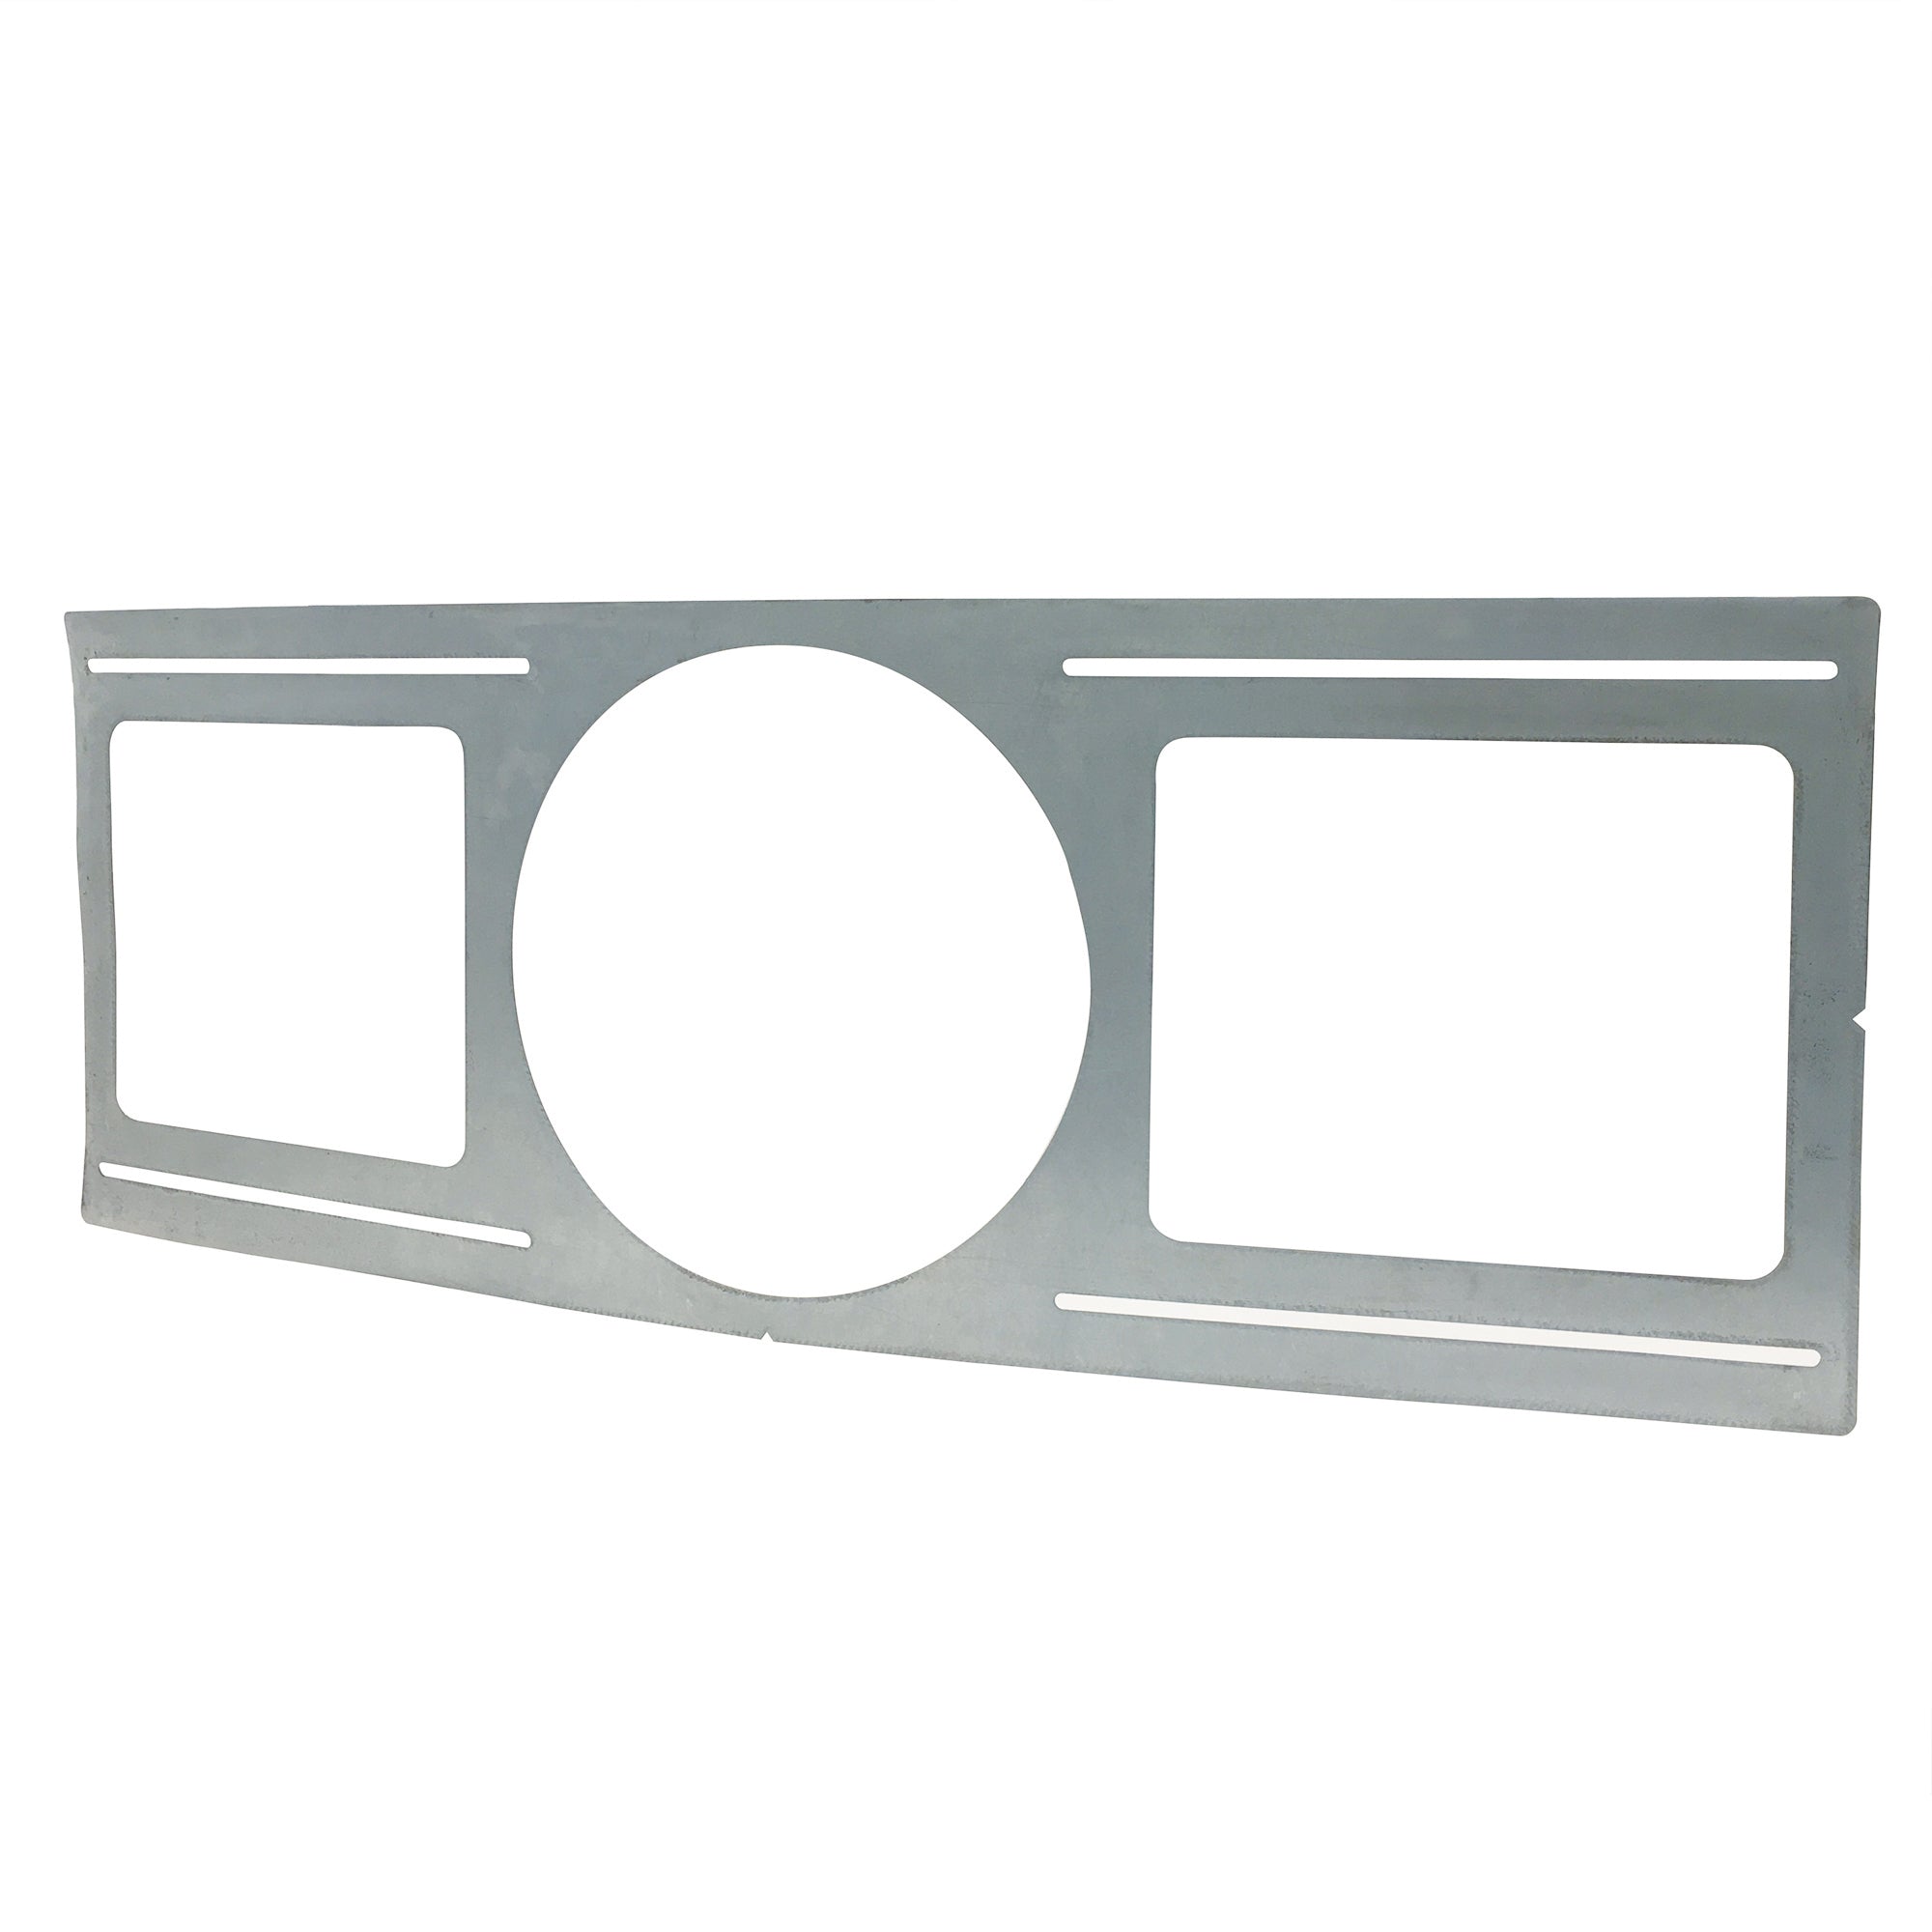 Nora Lighting NFP-R725 - Recessed - New Construction Plate for 8” Round Can-less Downlights